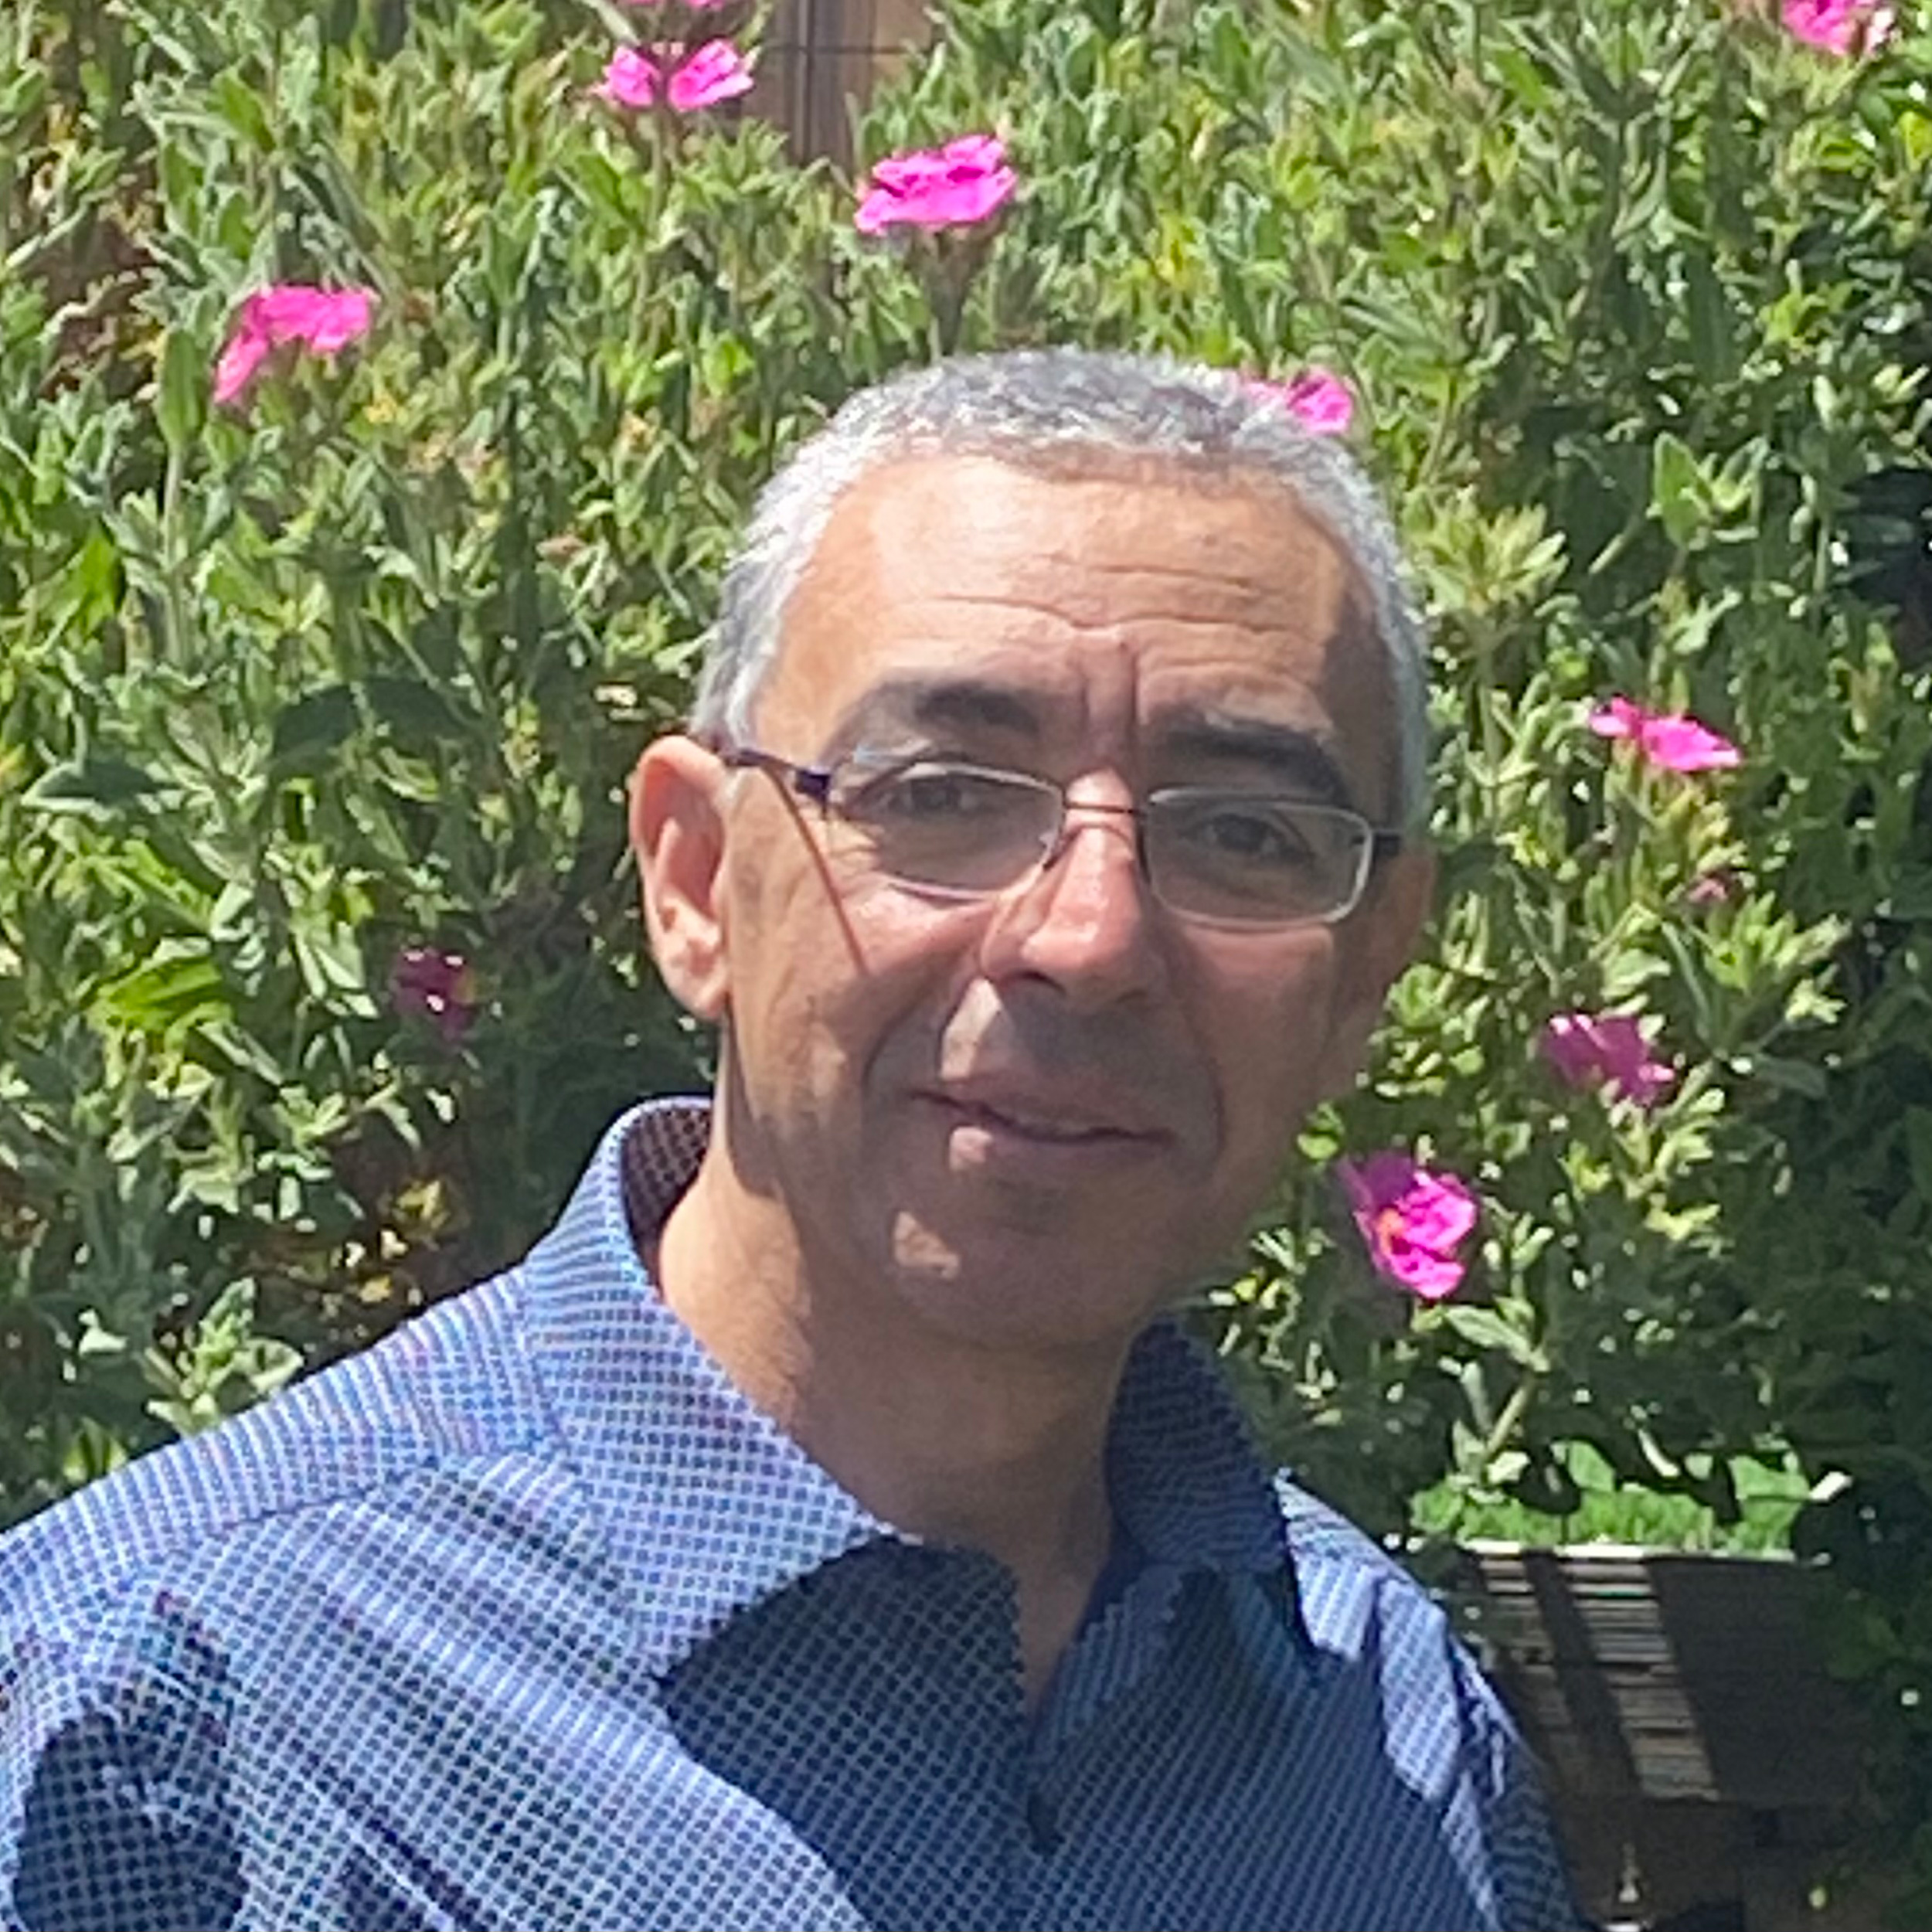 Ahmed AbouAlfotouh